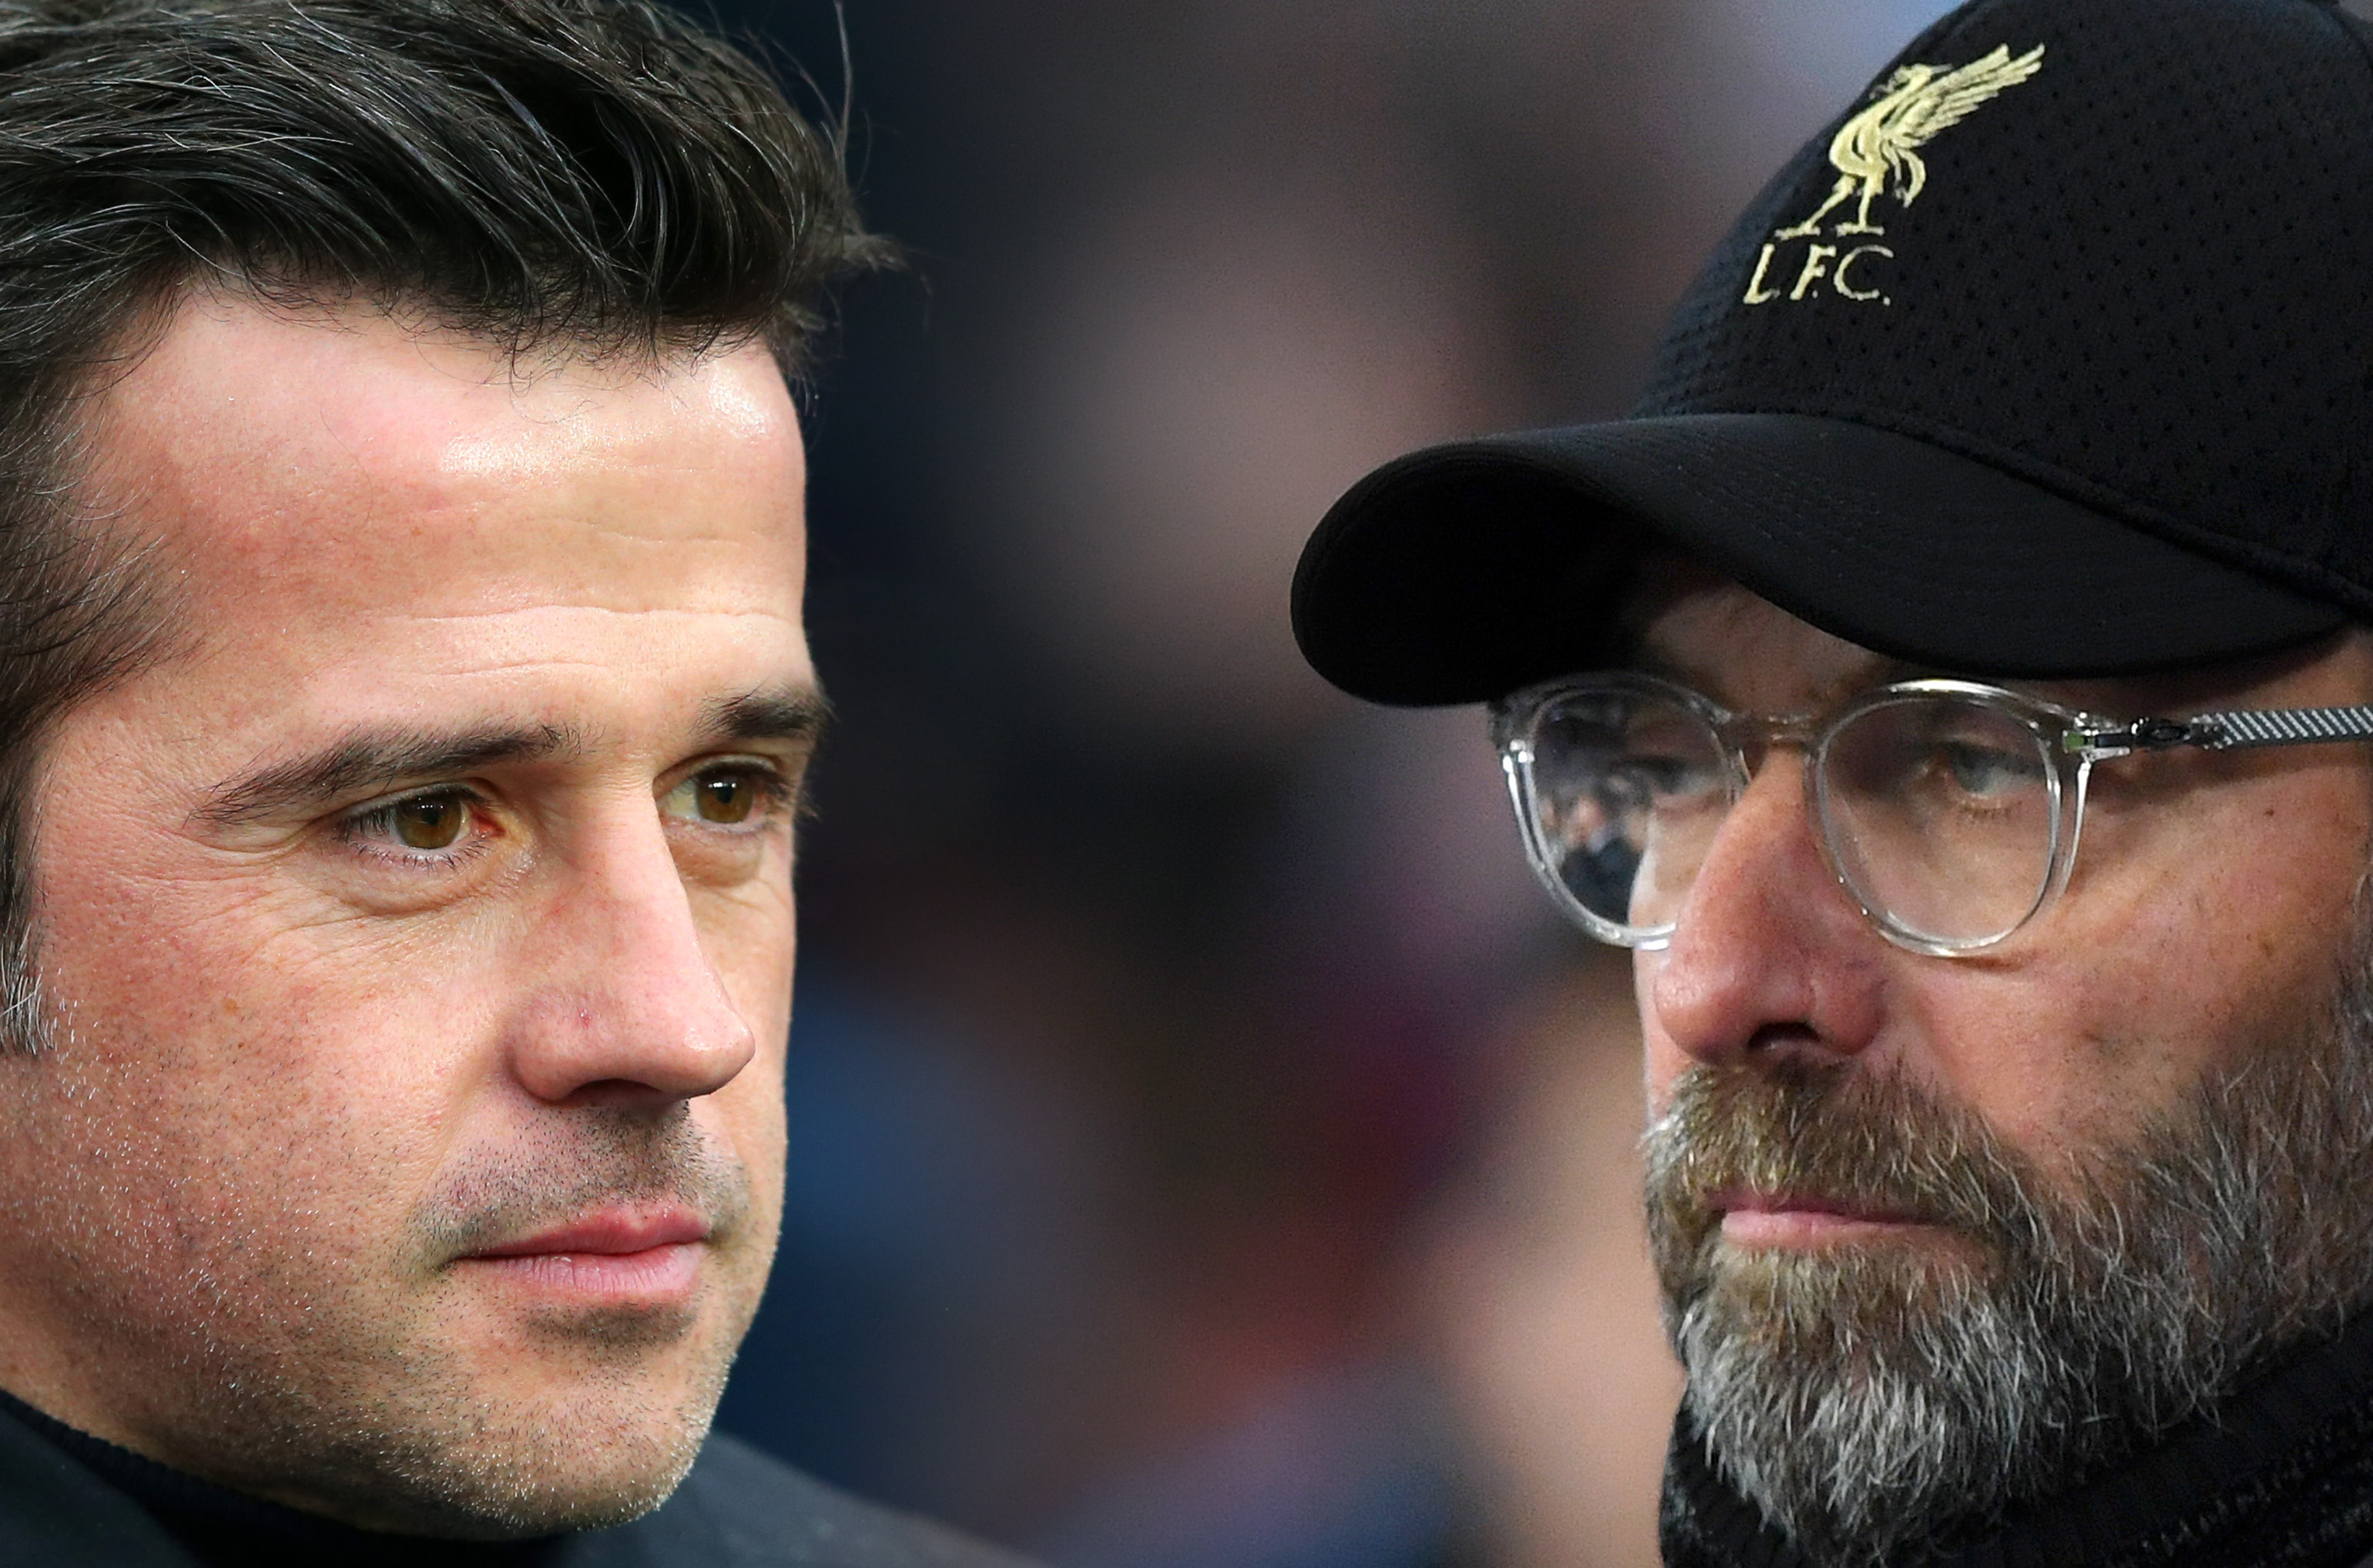 FILE PHOTO (EDITORS NOTE: COMPOSITE OF IMAGES - Image numbers 1073490870,1072868284 - GRADIENT ADDED) In this composite image a comparison has been made between Marco Silva, Manager of Everton (L) and Jurgen Klopp, Manager of Liverpool.  Everton and Liverpool  meet in a 
 Premier League fixture at Goodison Park on March 3,2019 in Liverpool,England. ***LEFT IMAGE*** MANCHESTER, ENGLAND - DECEMBER 15: Marco Silva, Manager of Everton looks on prior to the Premier League match between Manchester City and Everton FC at Etihad Stadium on December 15, 2018 in Manchester, United Kingdom. (Photo by Alex Livesey/Getty Images) ***RIGHT IMAGE***  MANCHESTER, ENGLAND - JANUARY 03: Jurgen Klopp, Manager of Liverpool looks on prior to the Premier League match between Manchester City and Liverpool FC at the Etihad Stadium on January 3, 2019 in Manchester, United Kingdom. (Photo by Shaun Botterill/Getty Images)